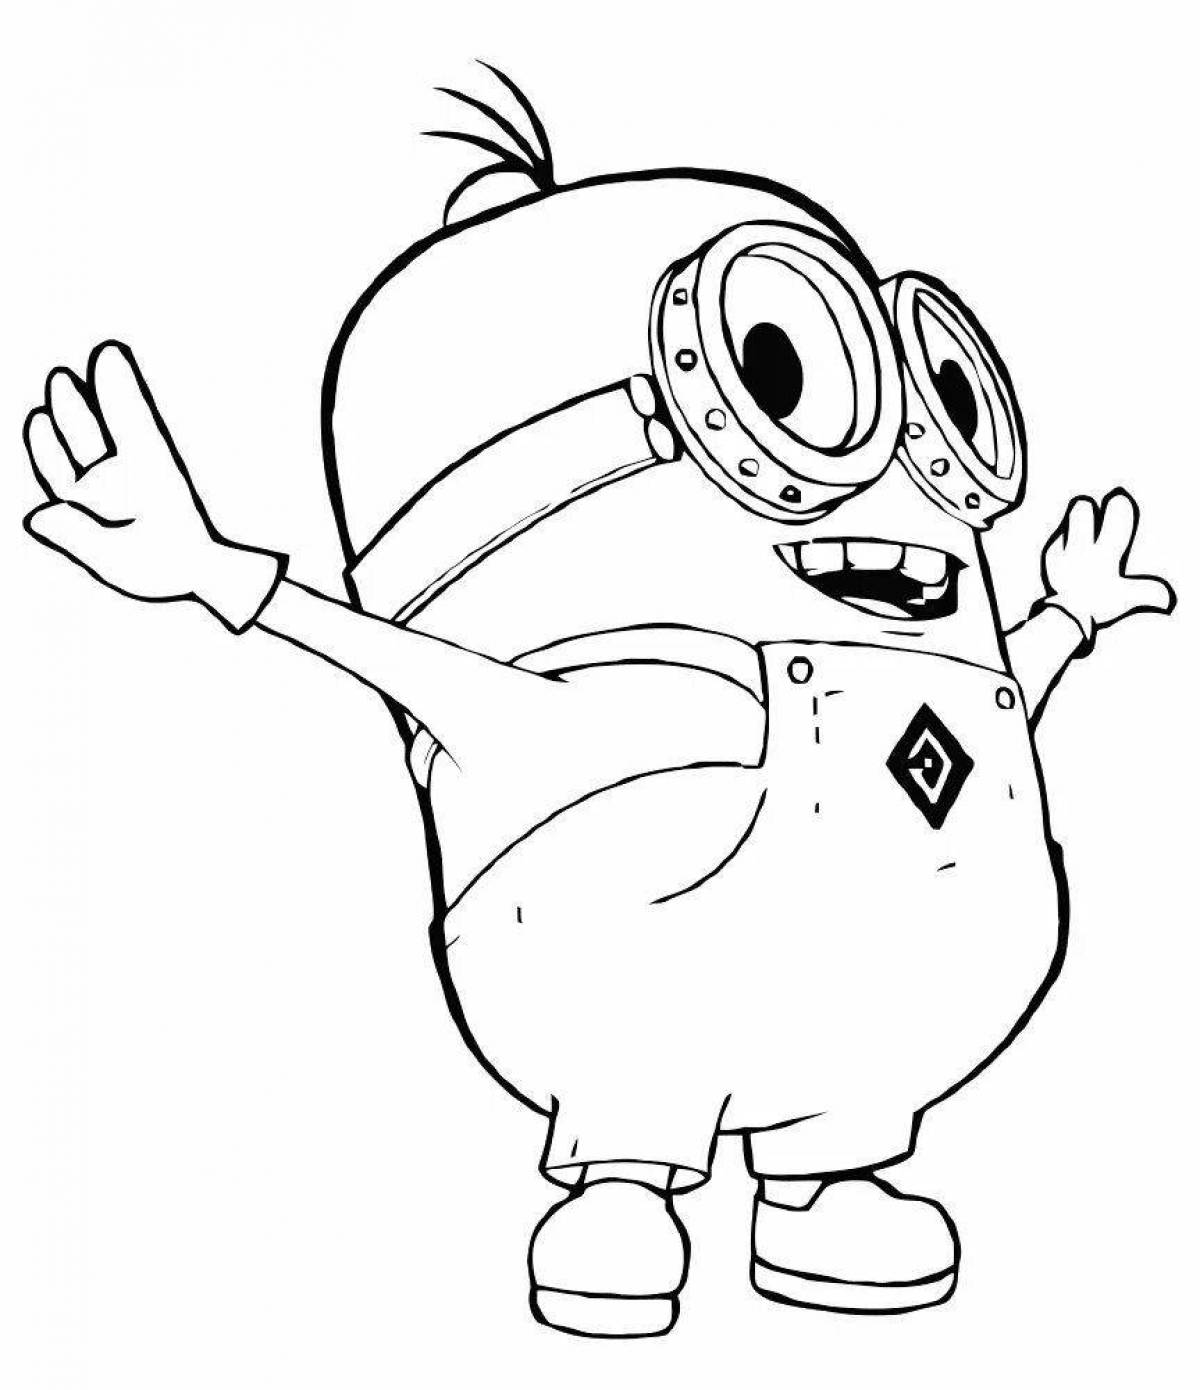 Impressive cartoon characters coloring pages for kids